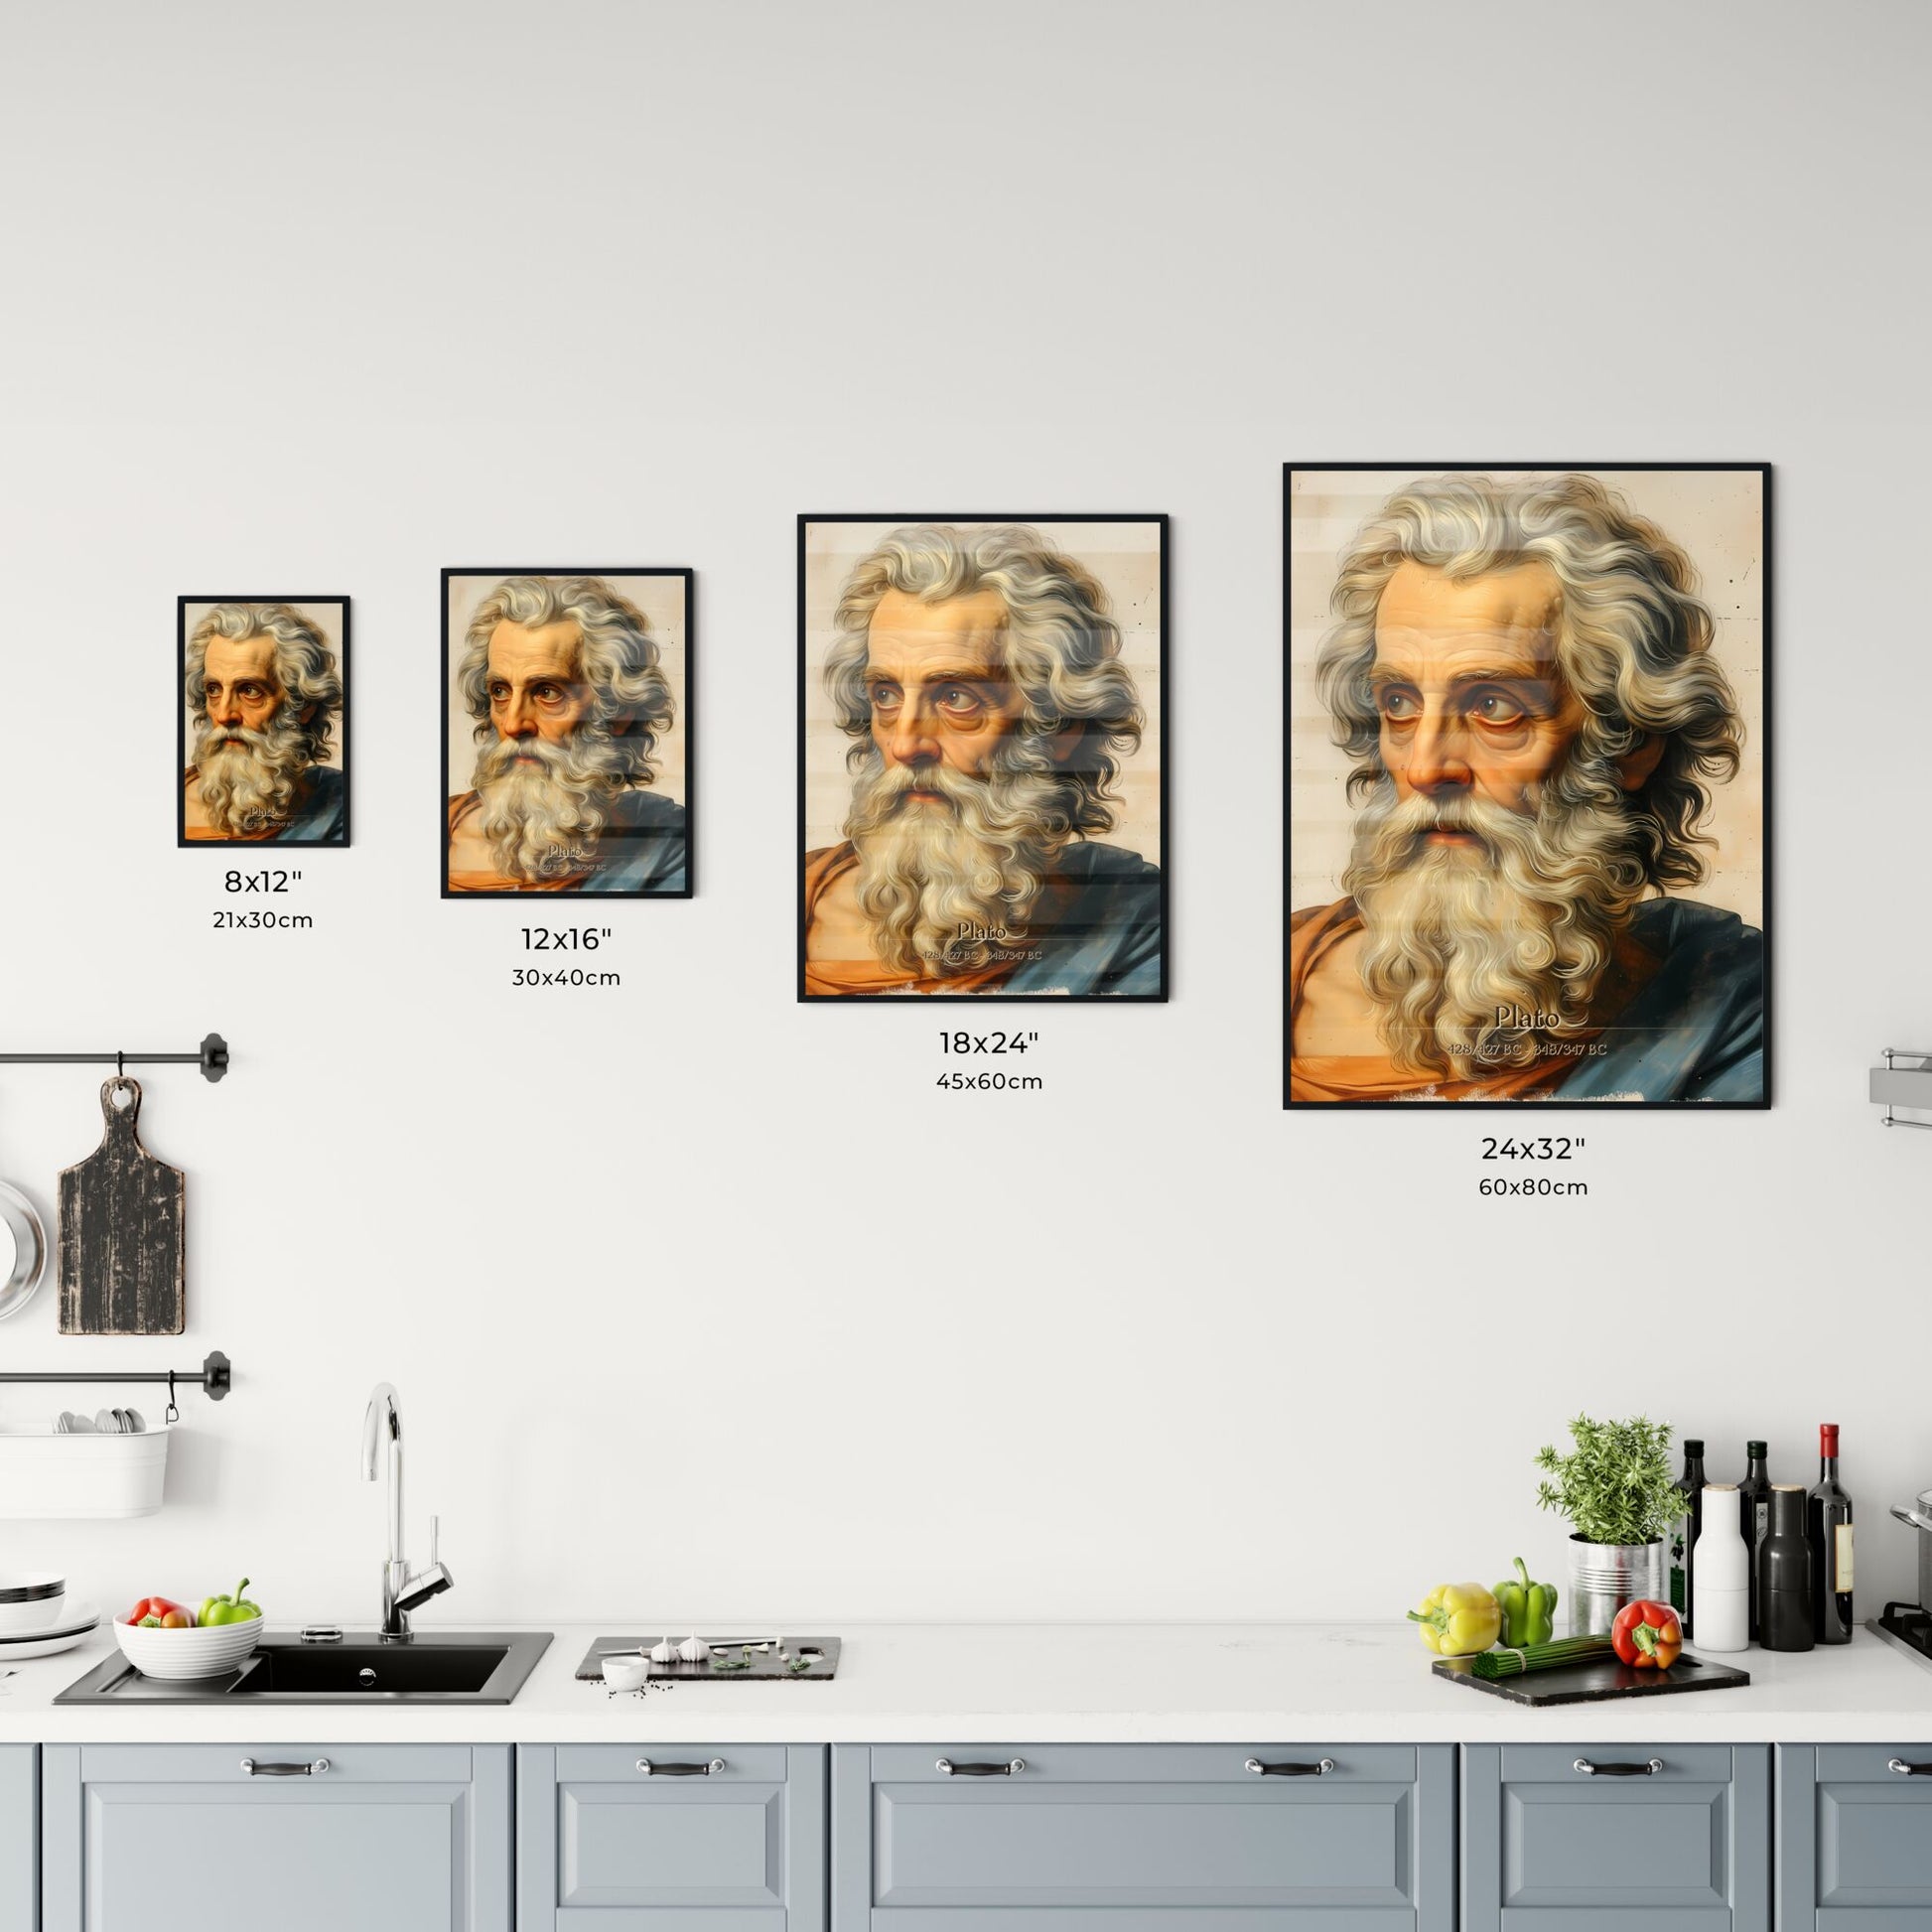 Plato, 428/427 BC - 348/347 BC, A Poster of a painting of a man with a long white beard Default Title